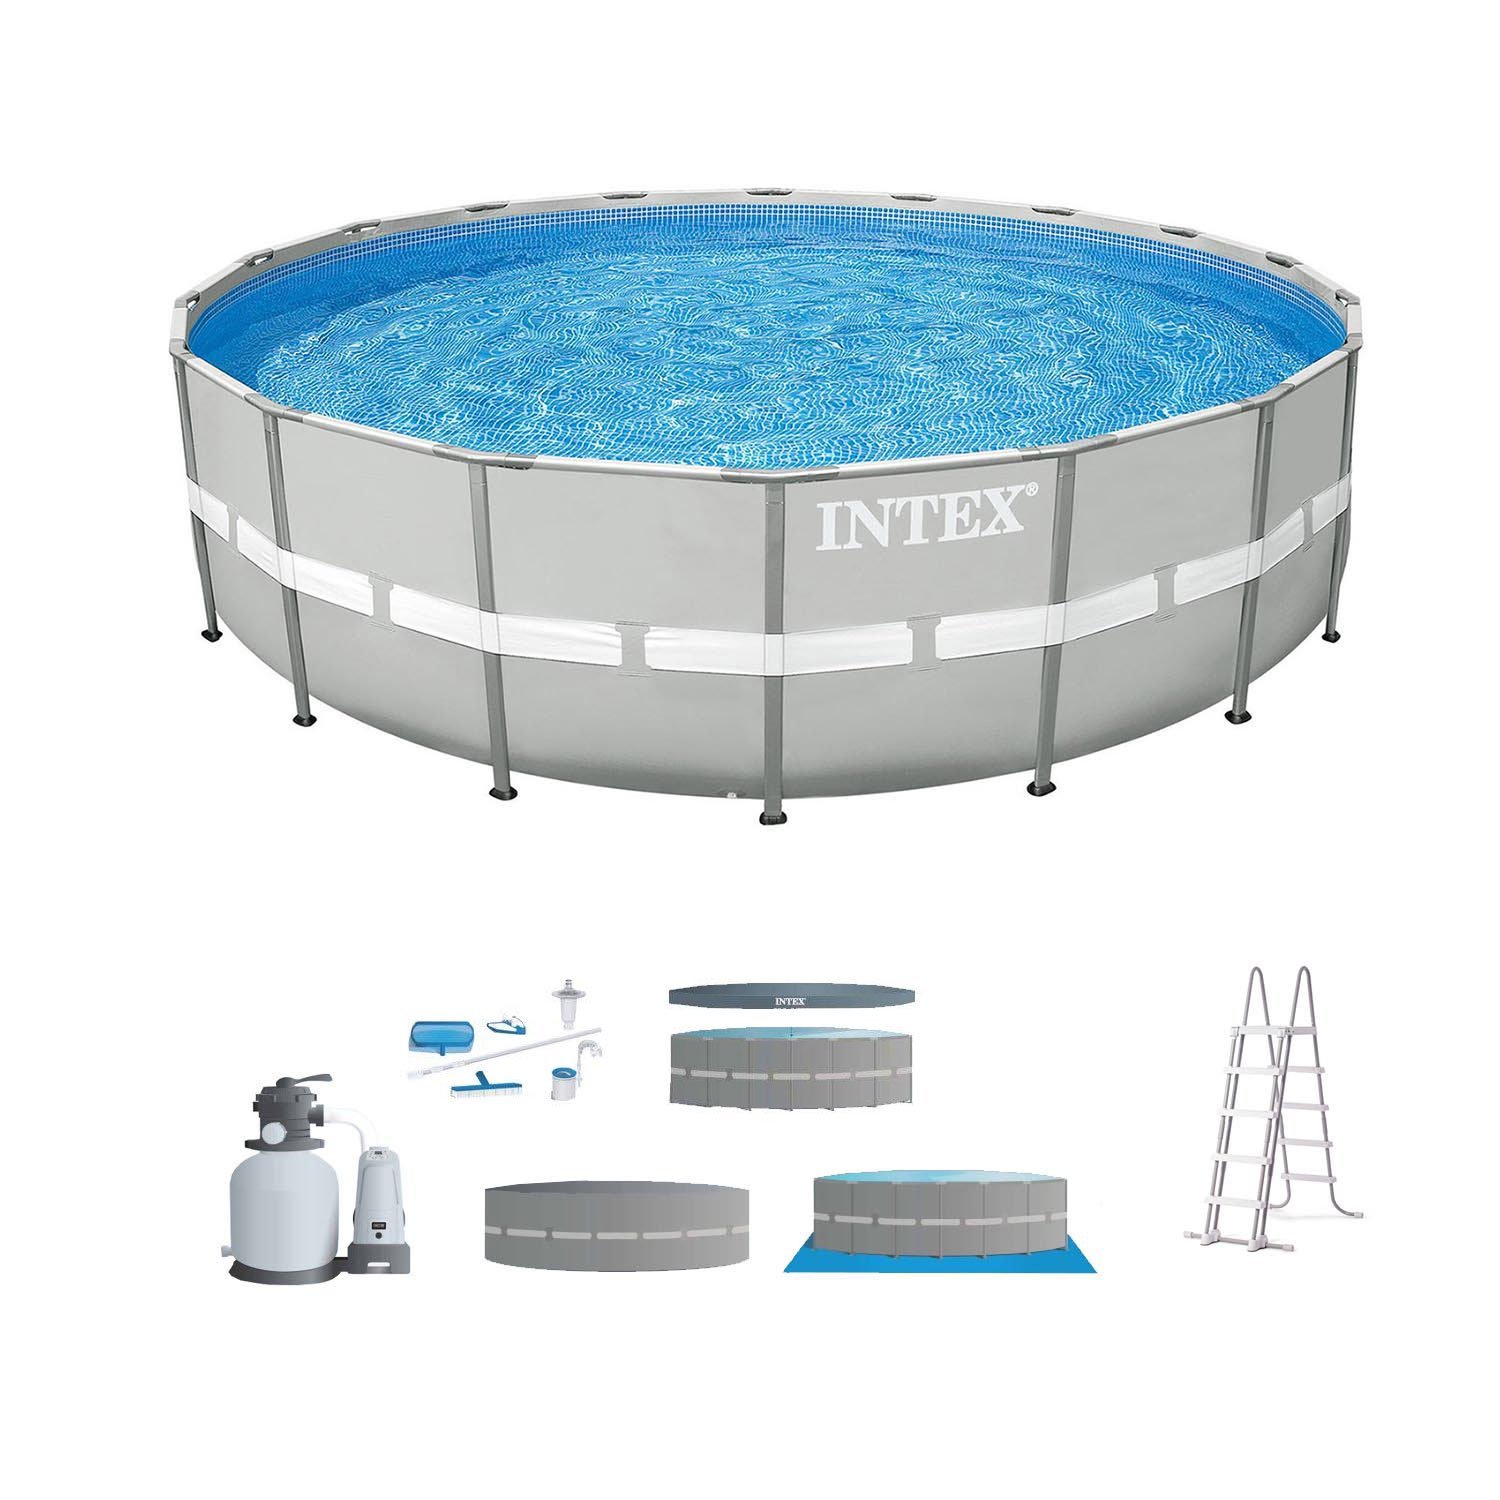 Intex 24' x 52" Steel Ultra Frame Round Above Ground Swimming Pool Set with Pump